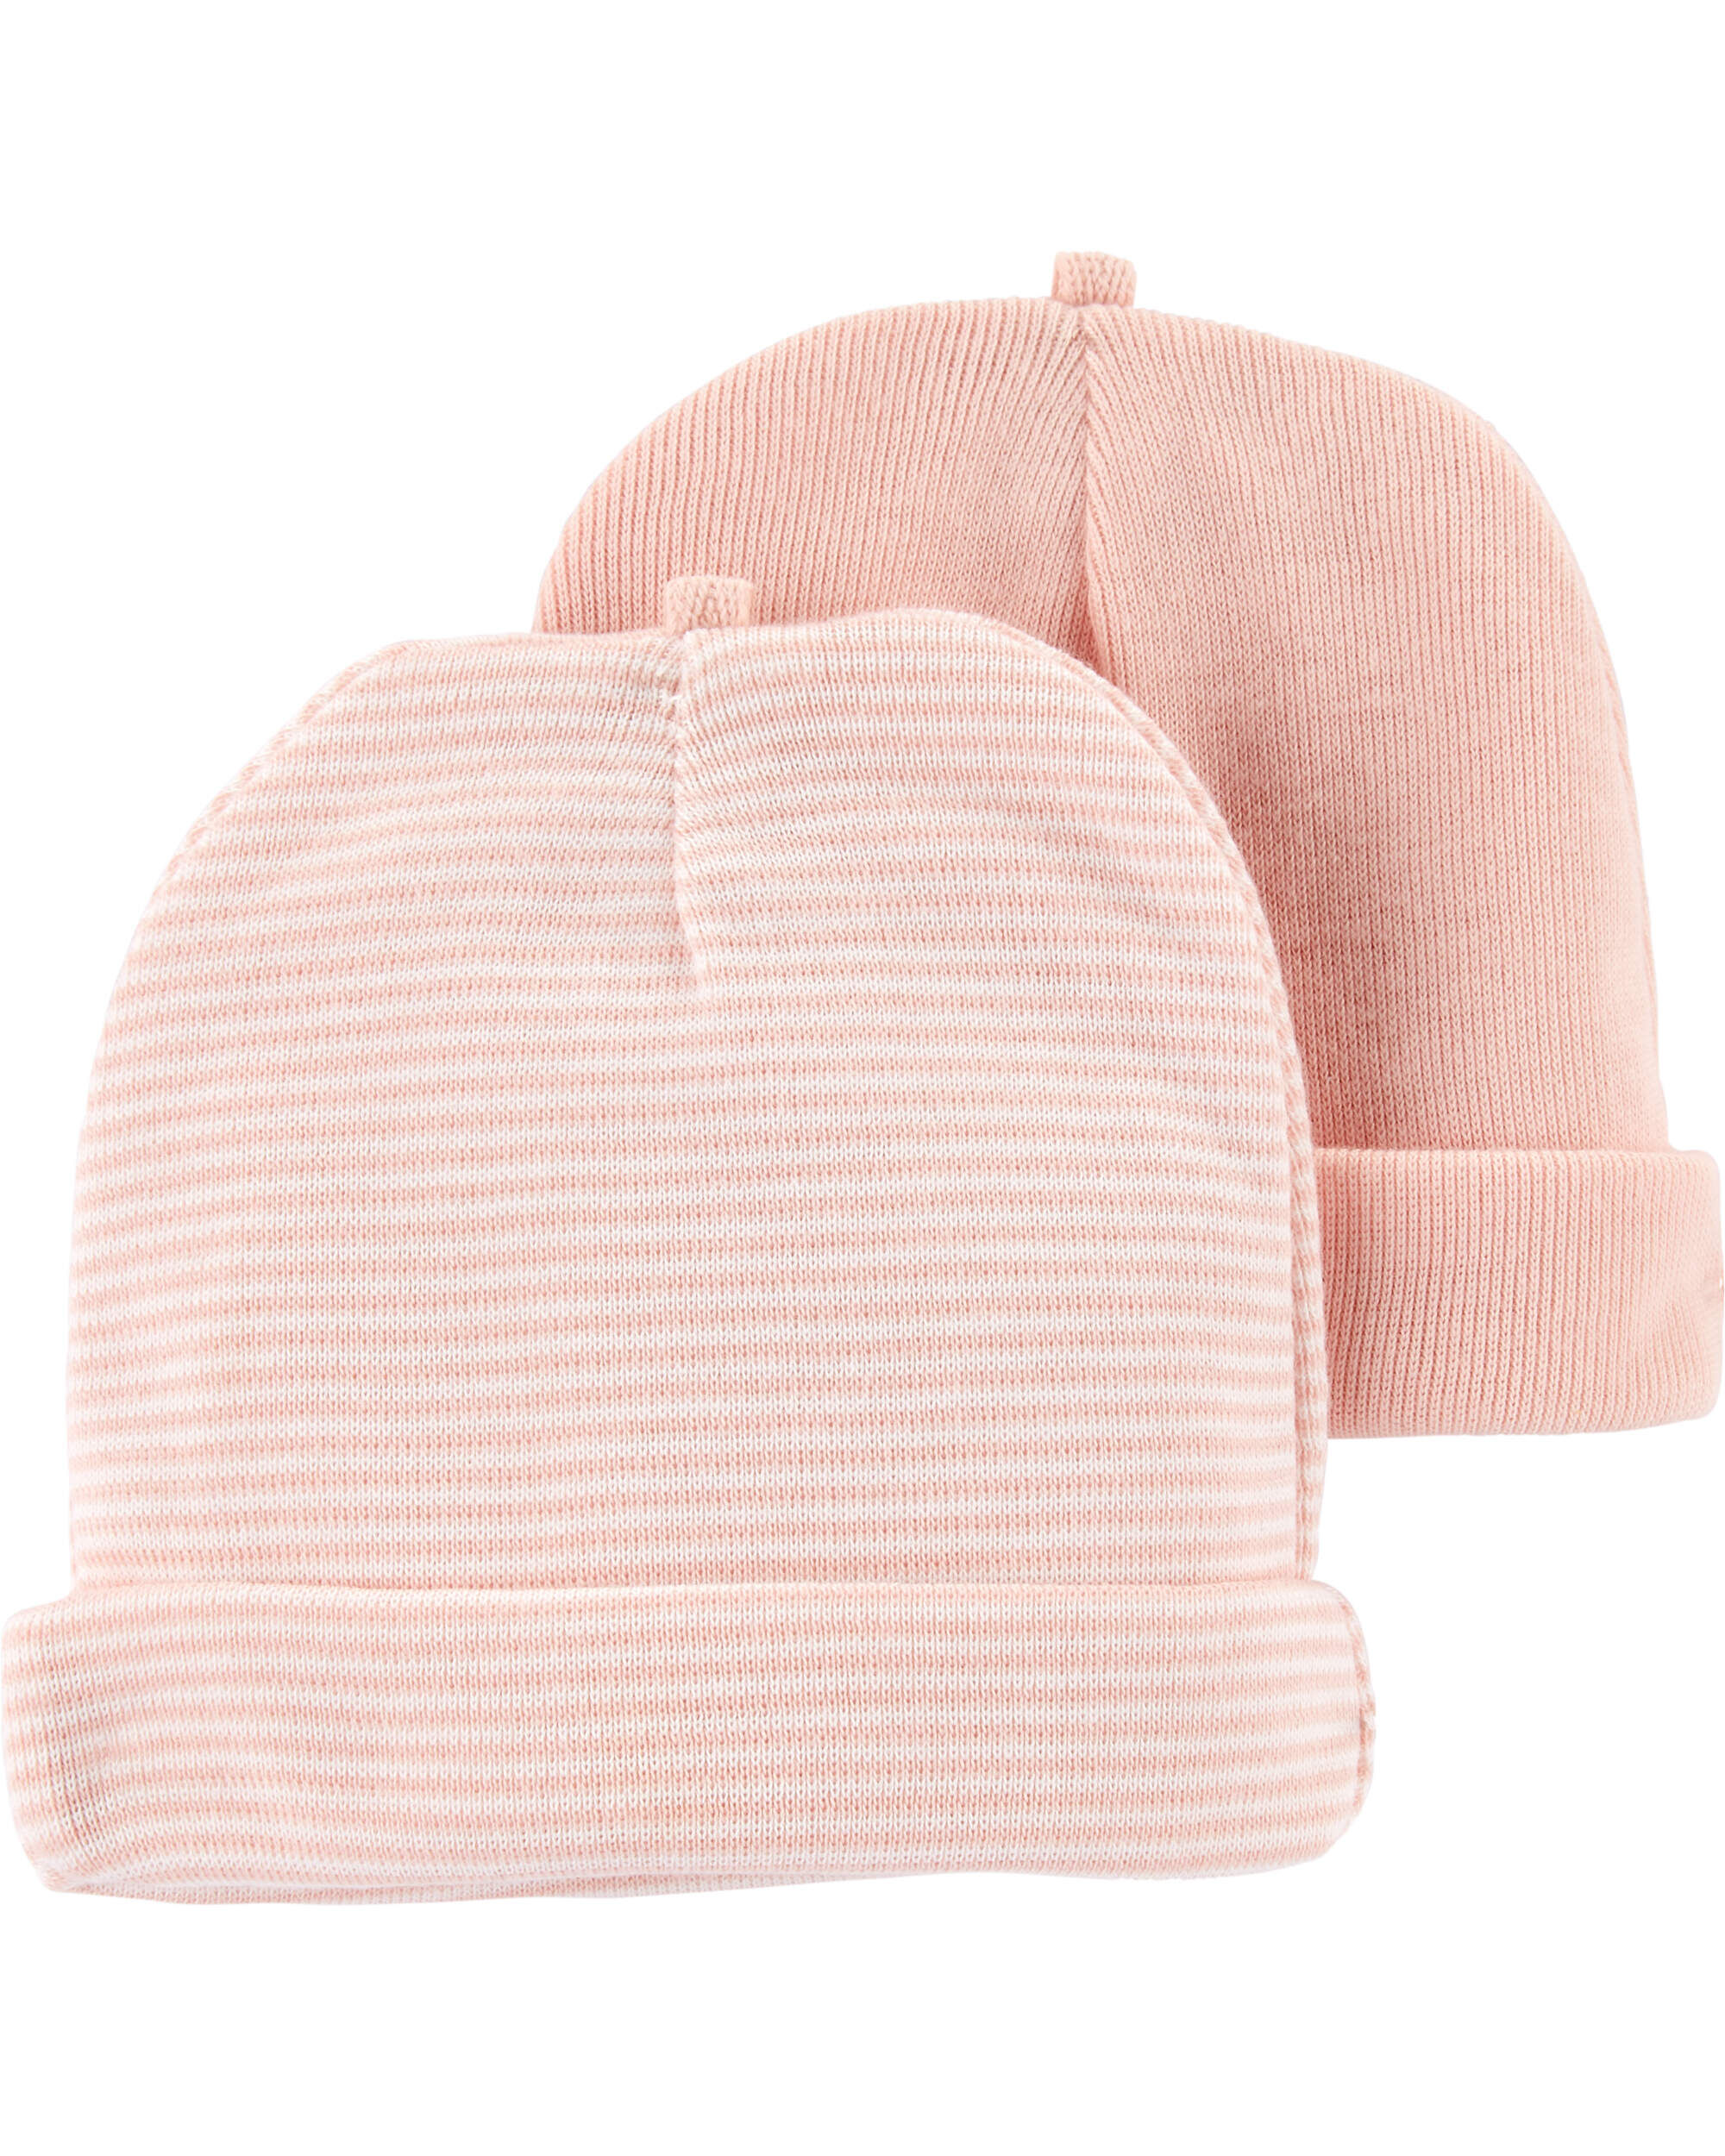 Carters Baby 2-Pack Caps